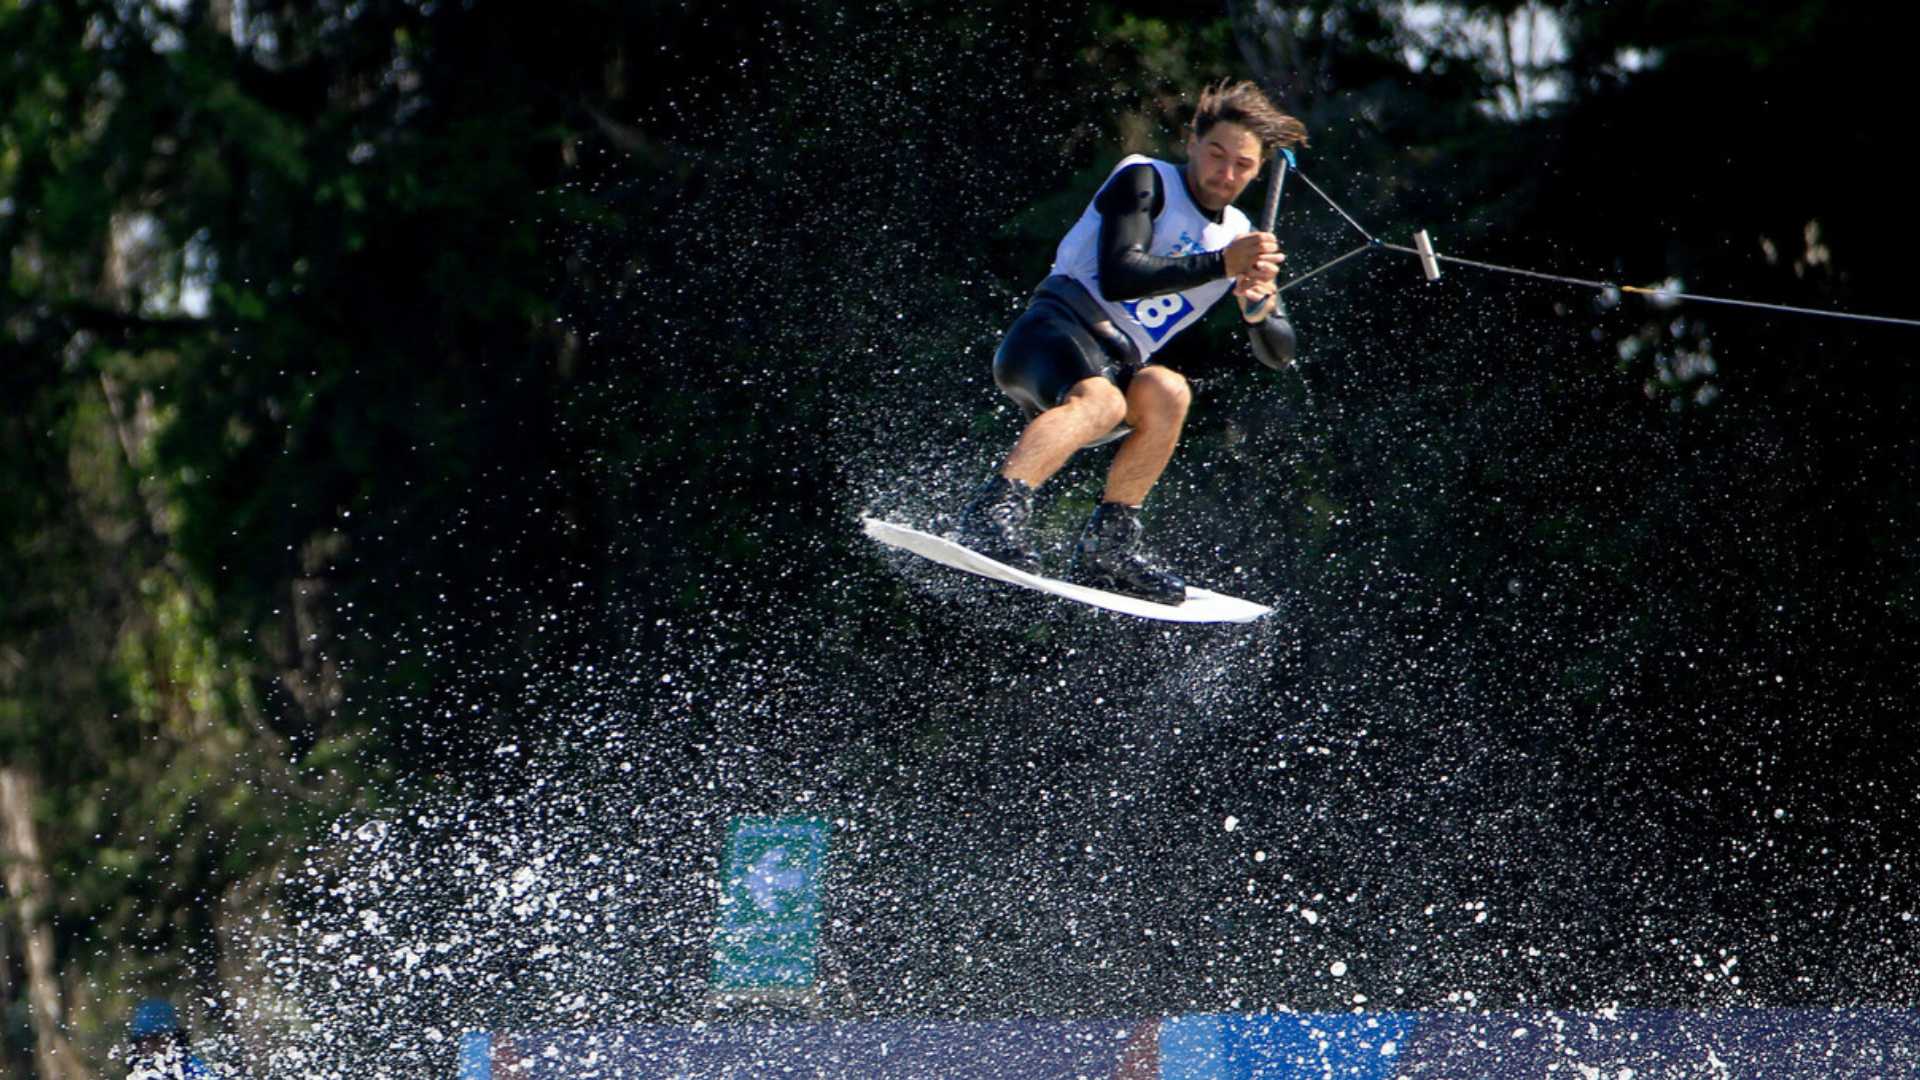 Argentina excells in wakeboardig